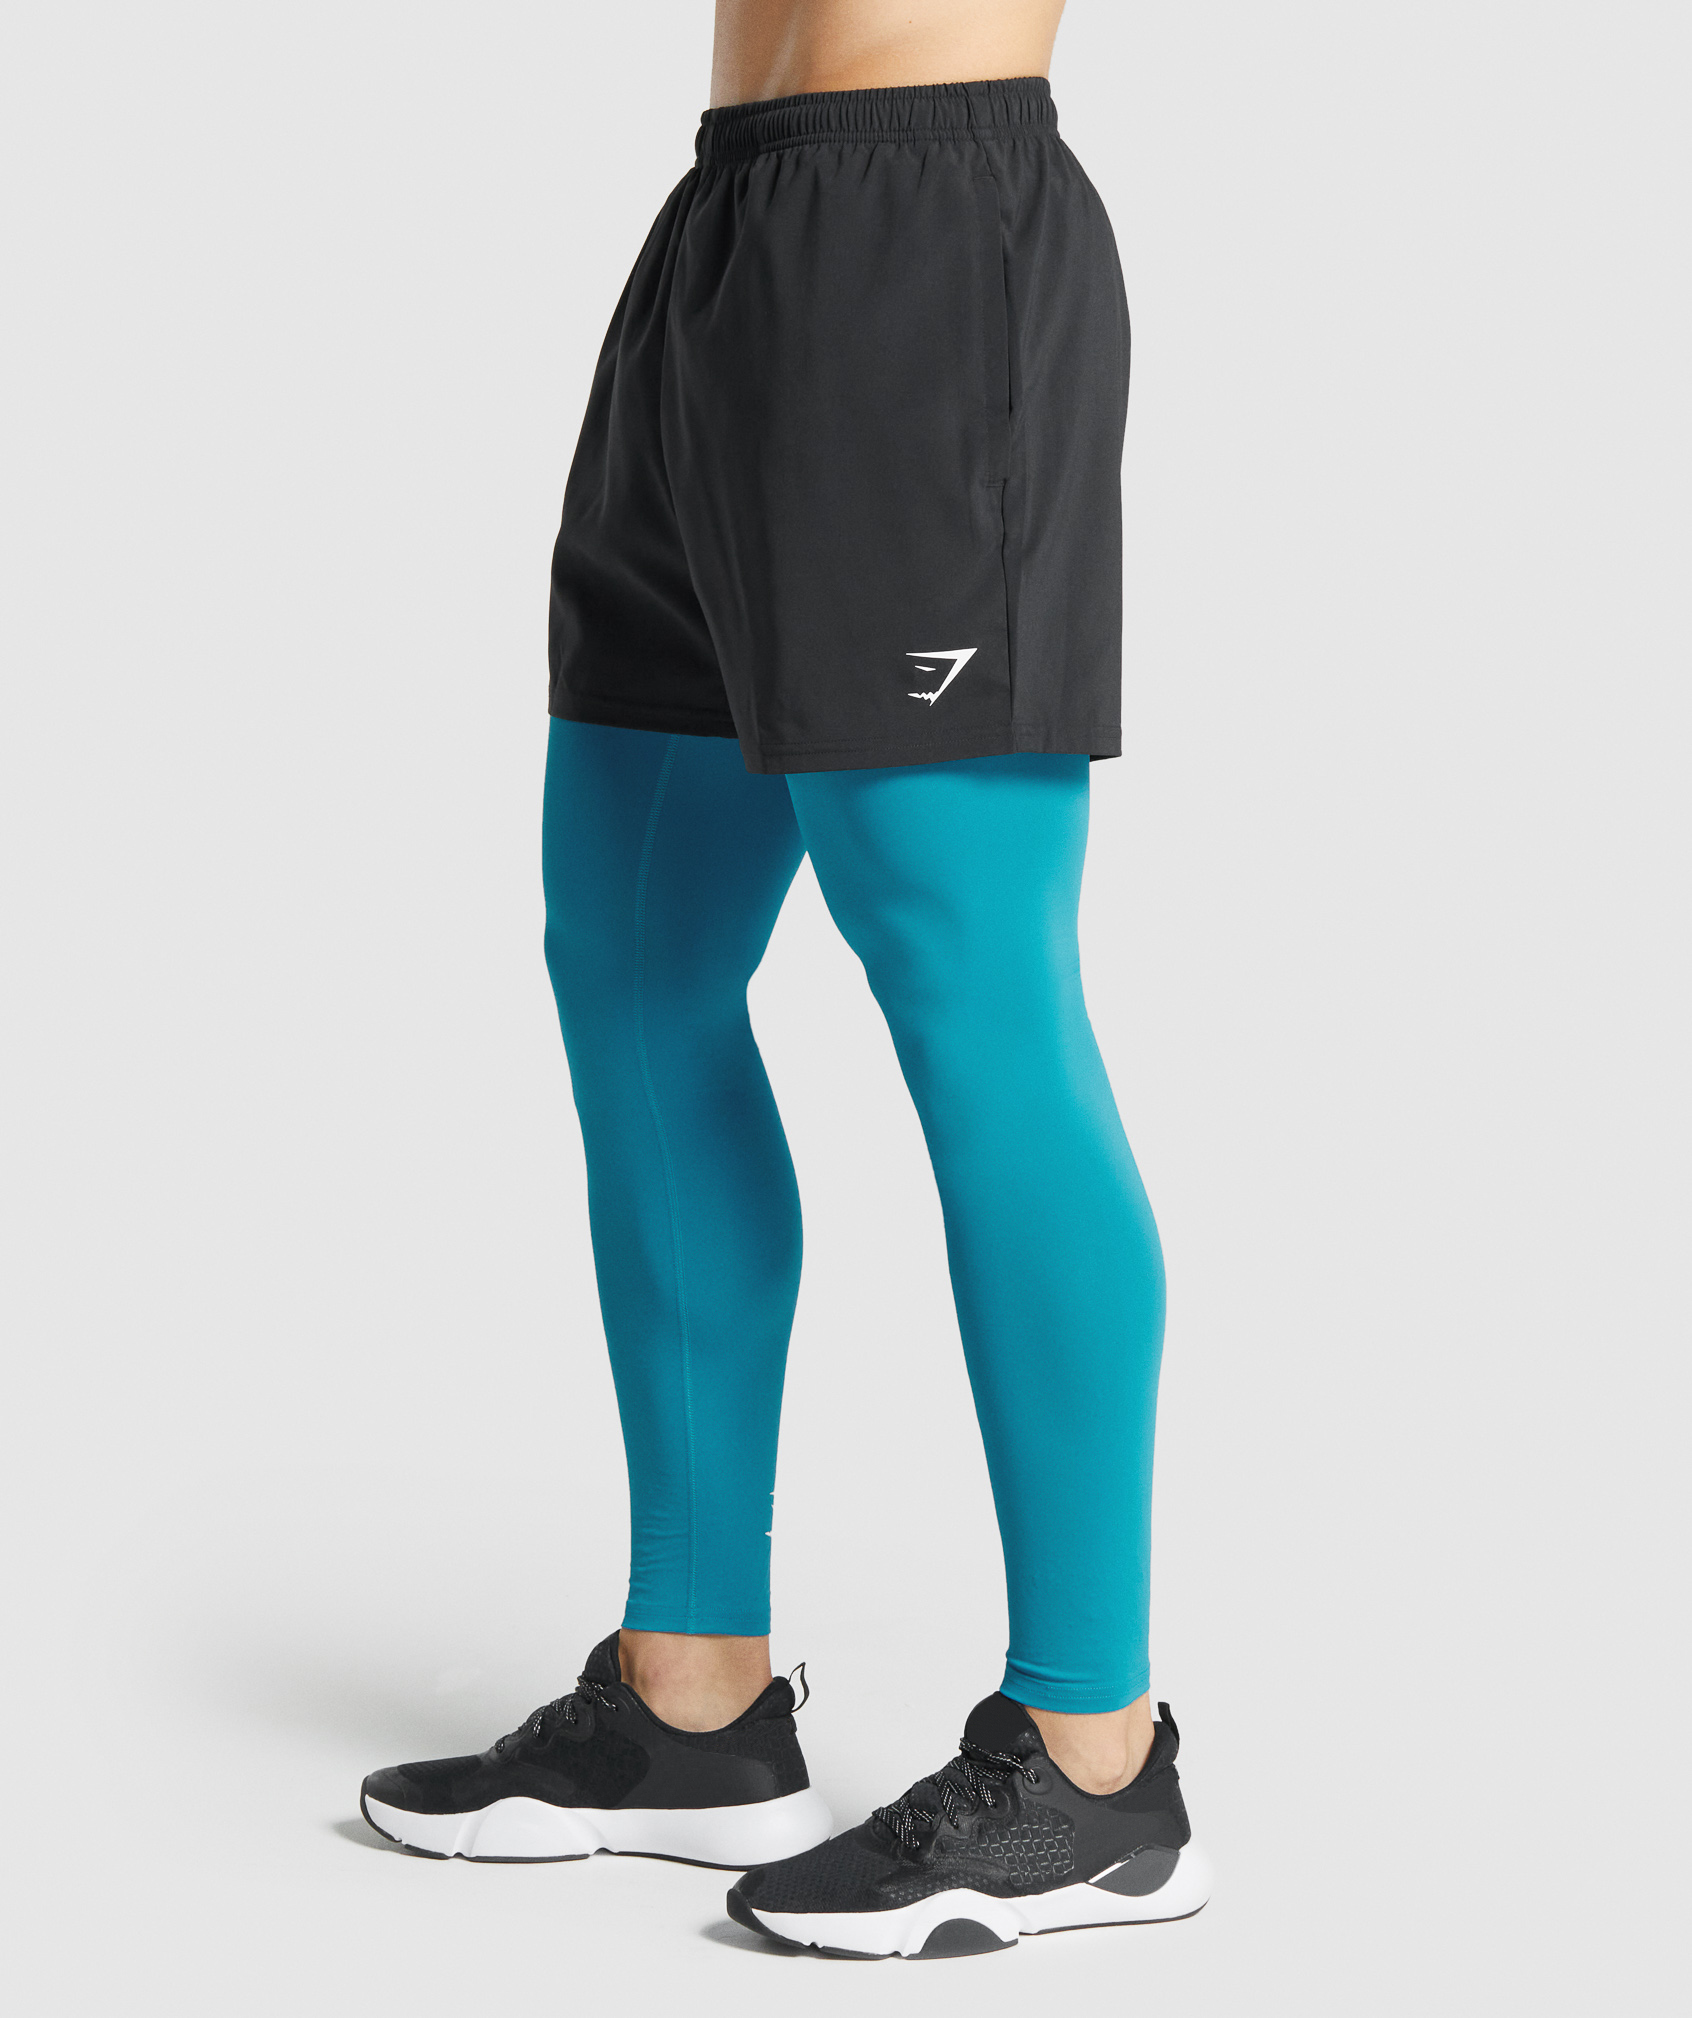 What To Wear For Cold Weather Running, Winter Running Gear Guide